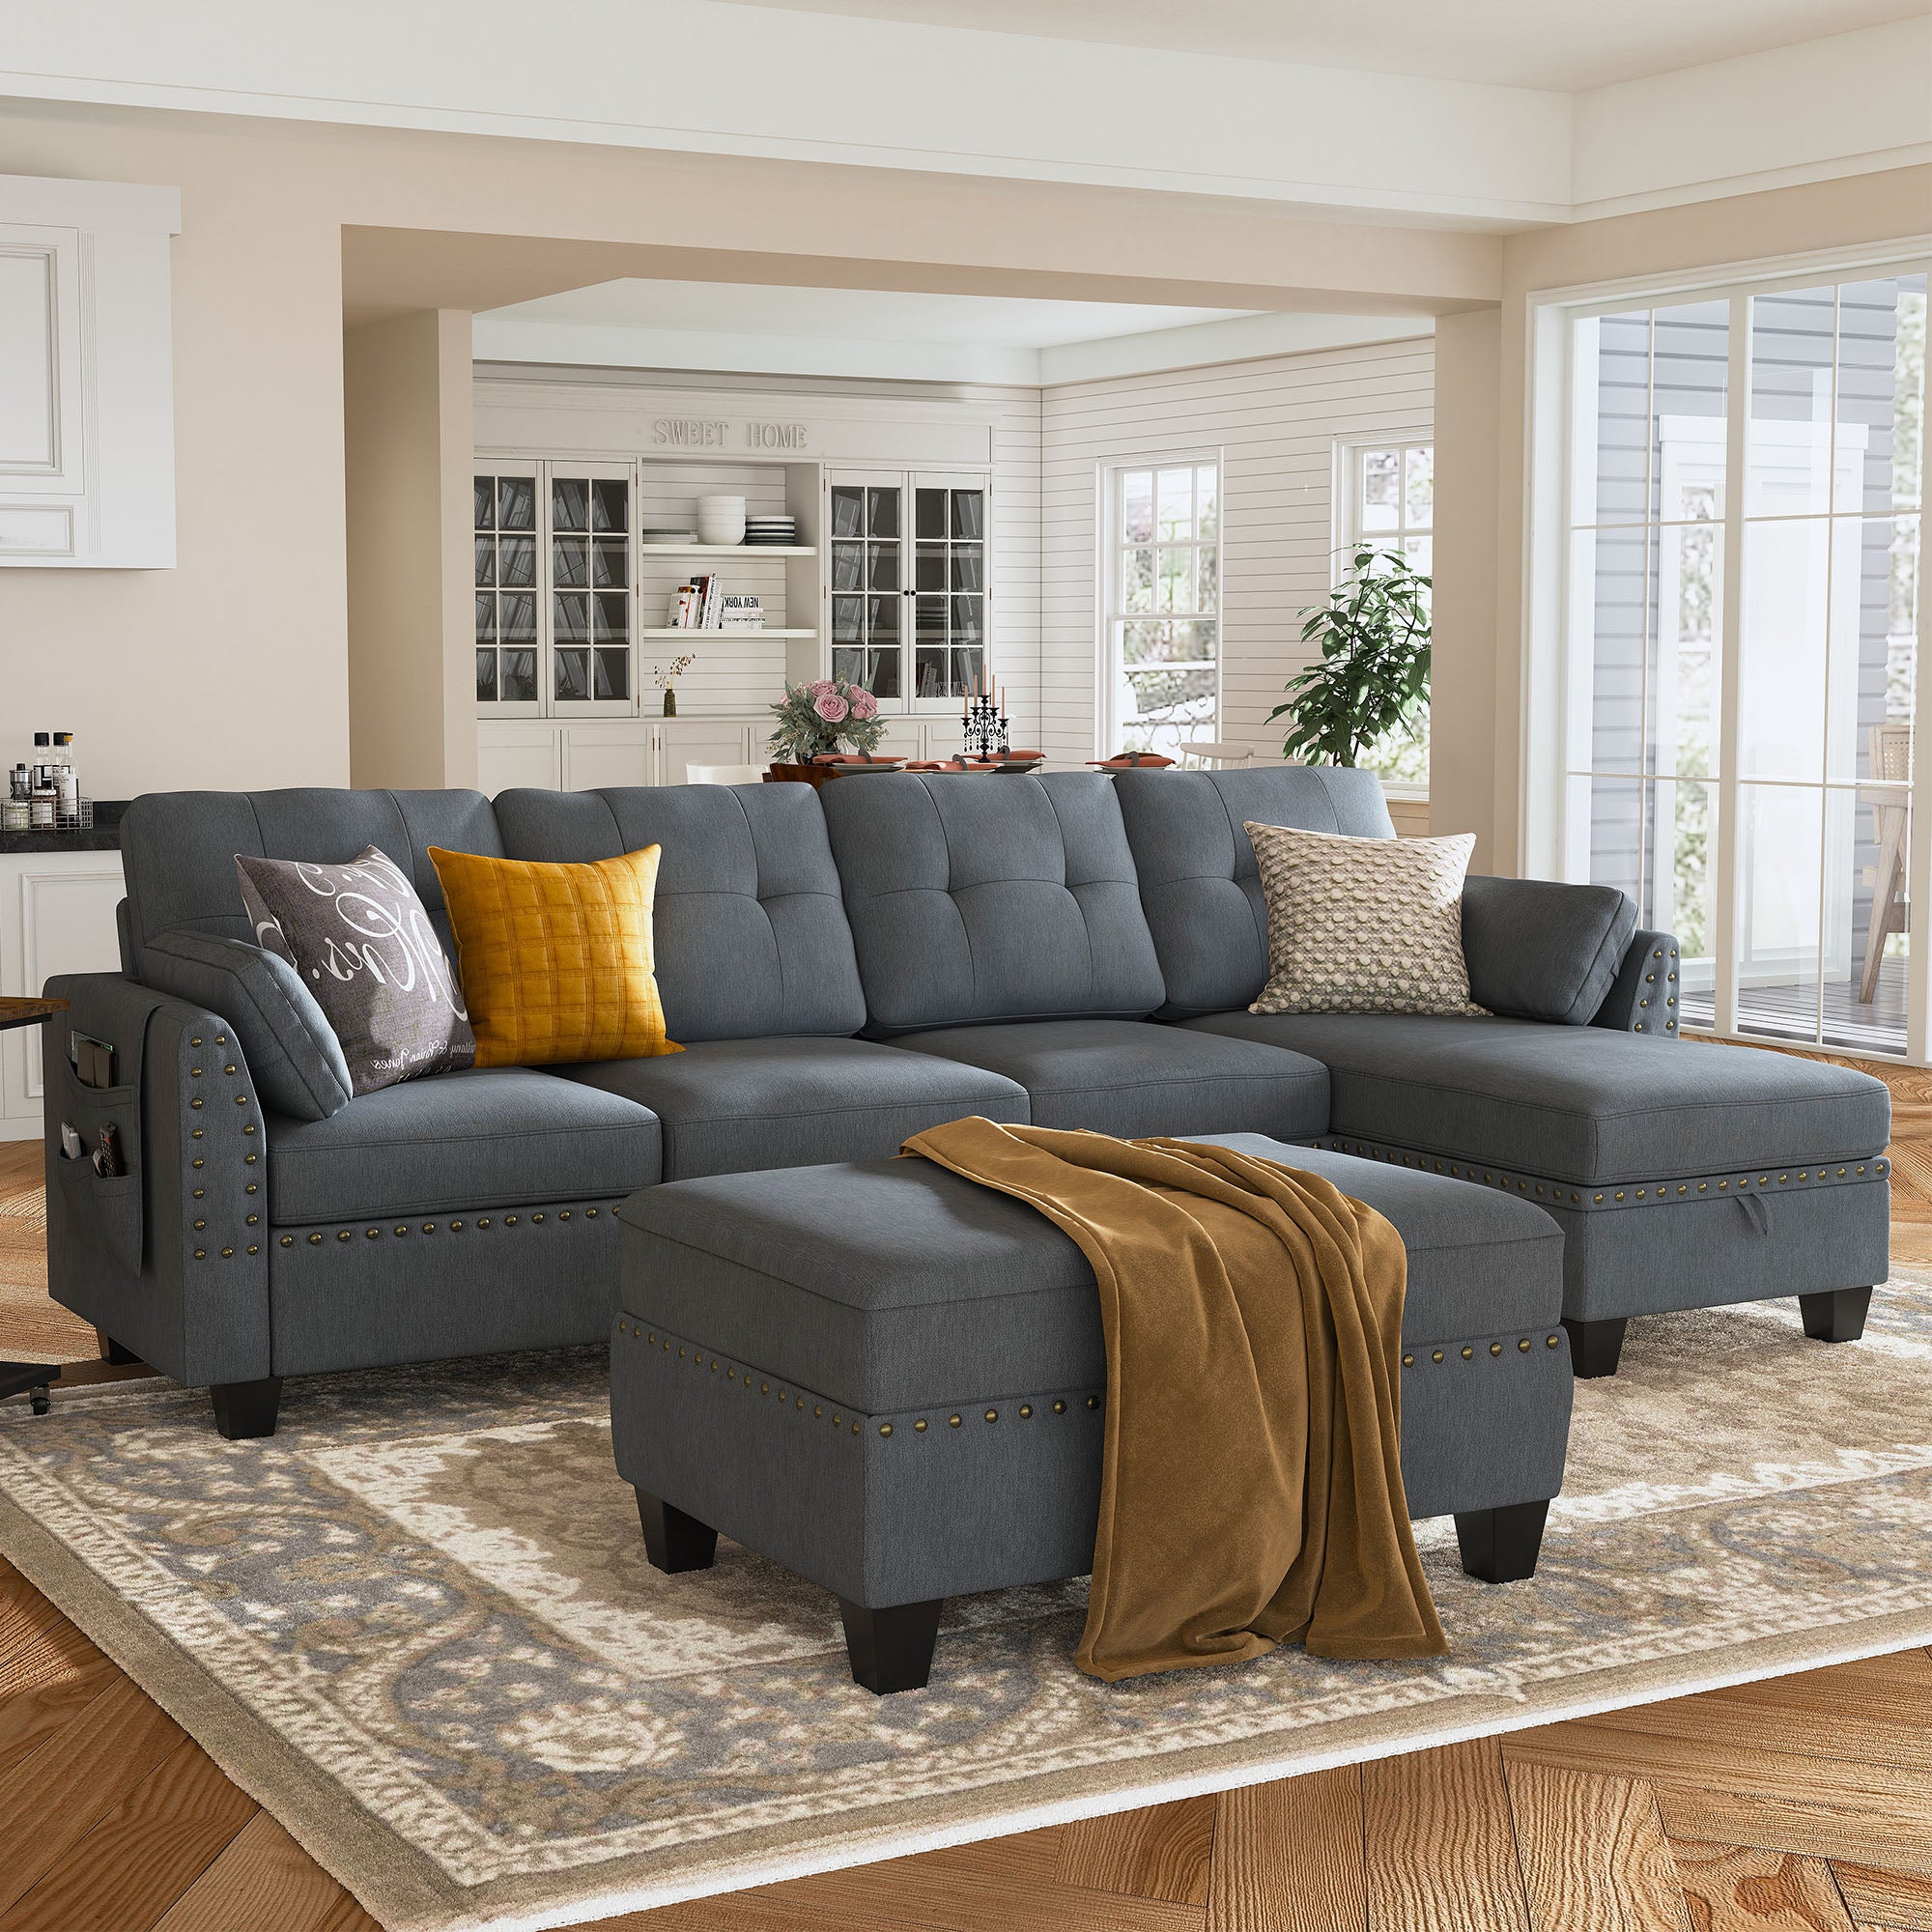 HONBAY 5-Piece Polyester Convertible Sectional With Storage Ottoman